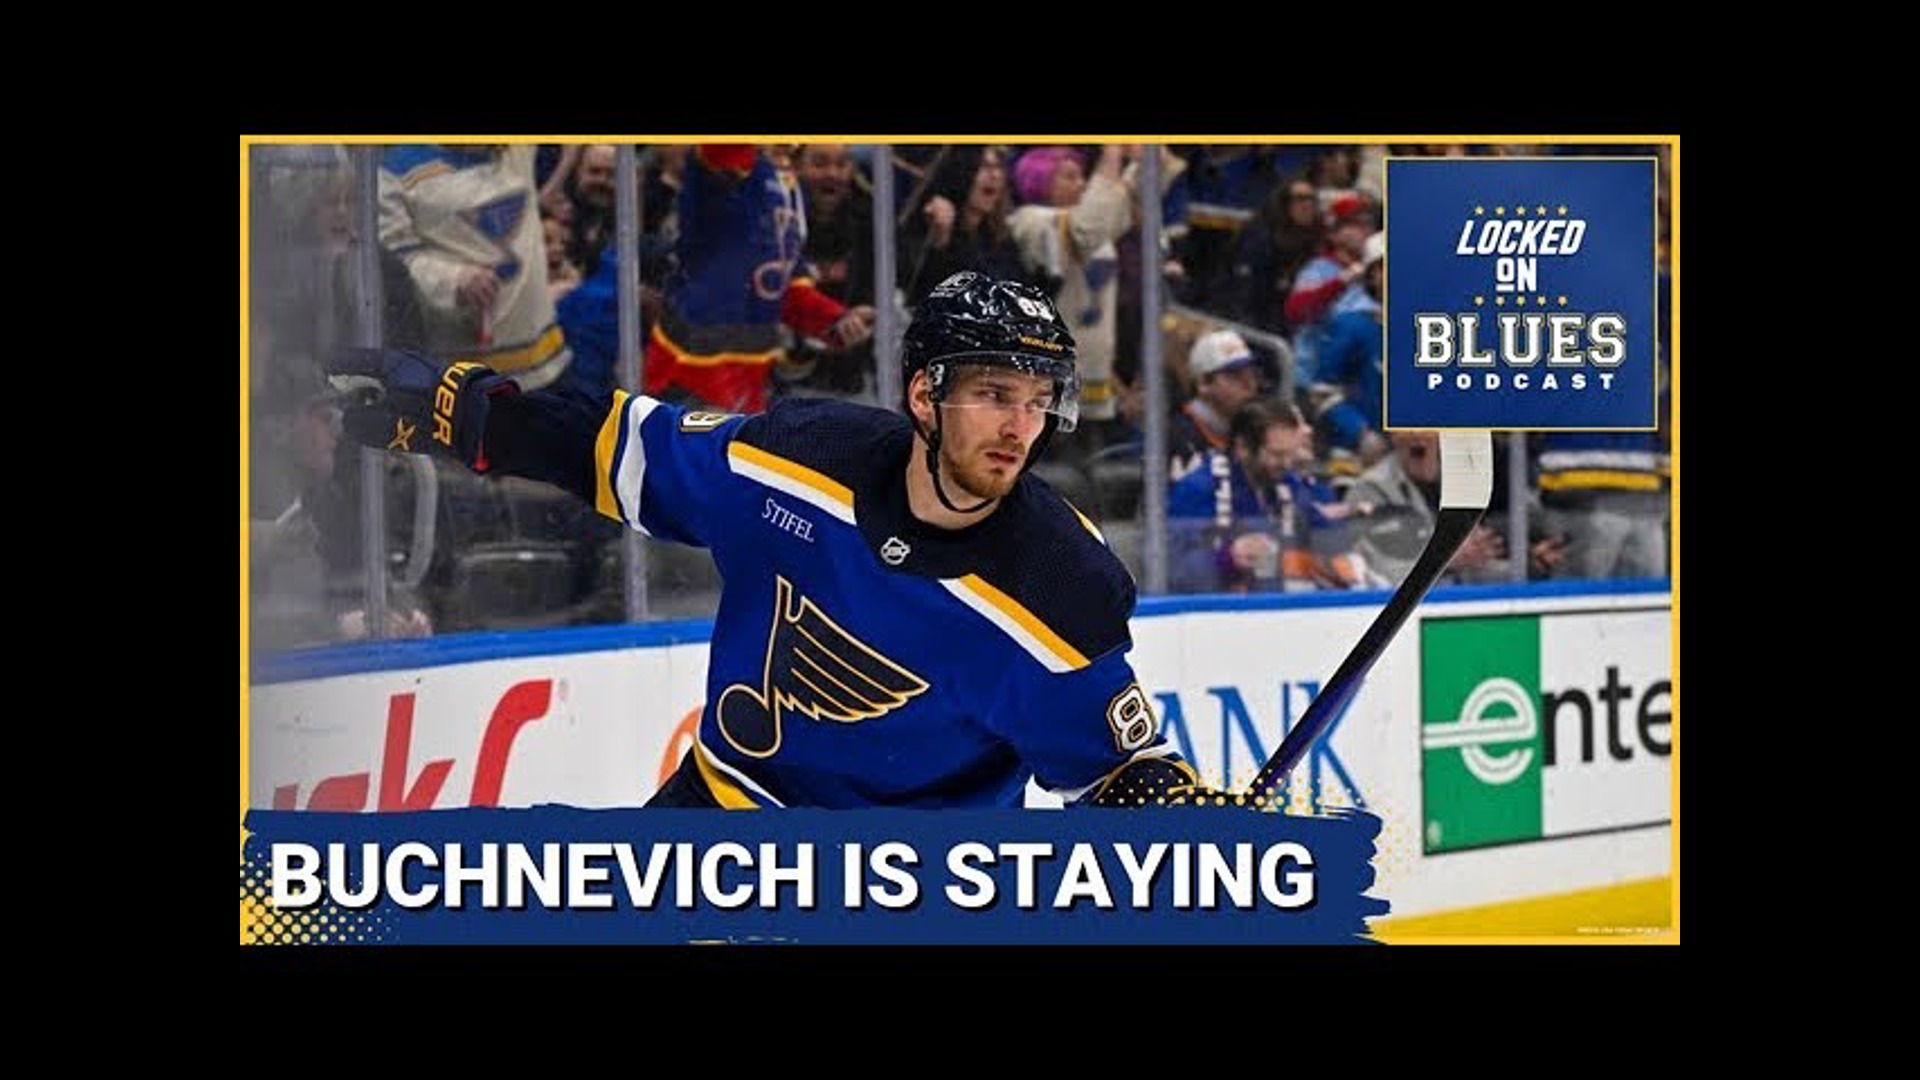 Toady was a busy day for the St. Louis Blues as Pavel Buchnevich signed a six-year extension taking him up until the 2030-2031 season.